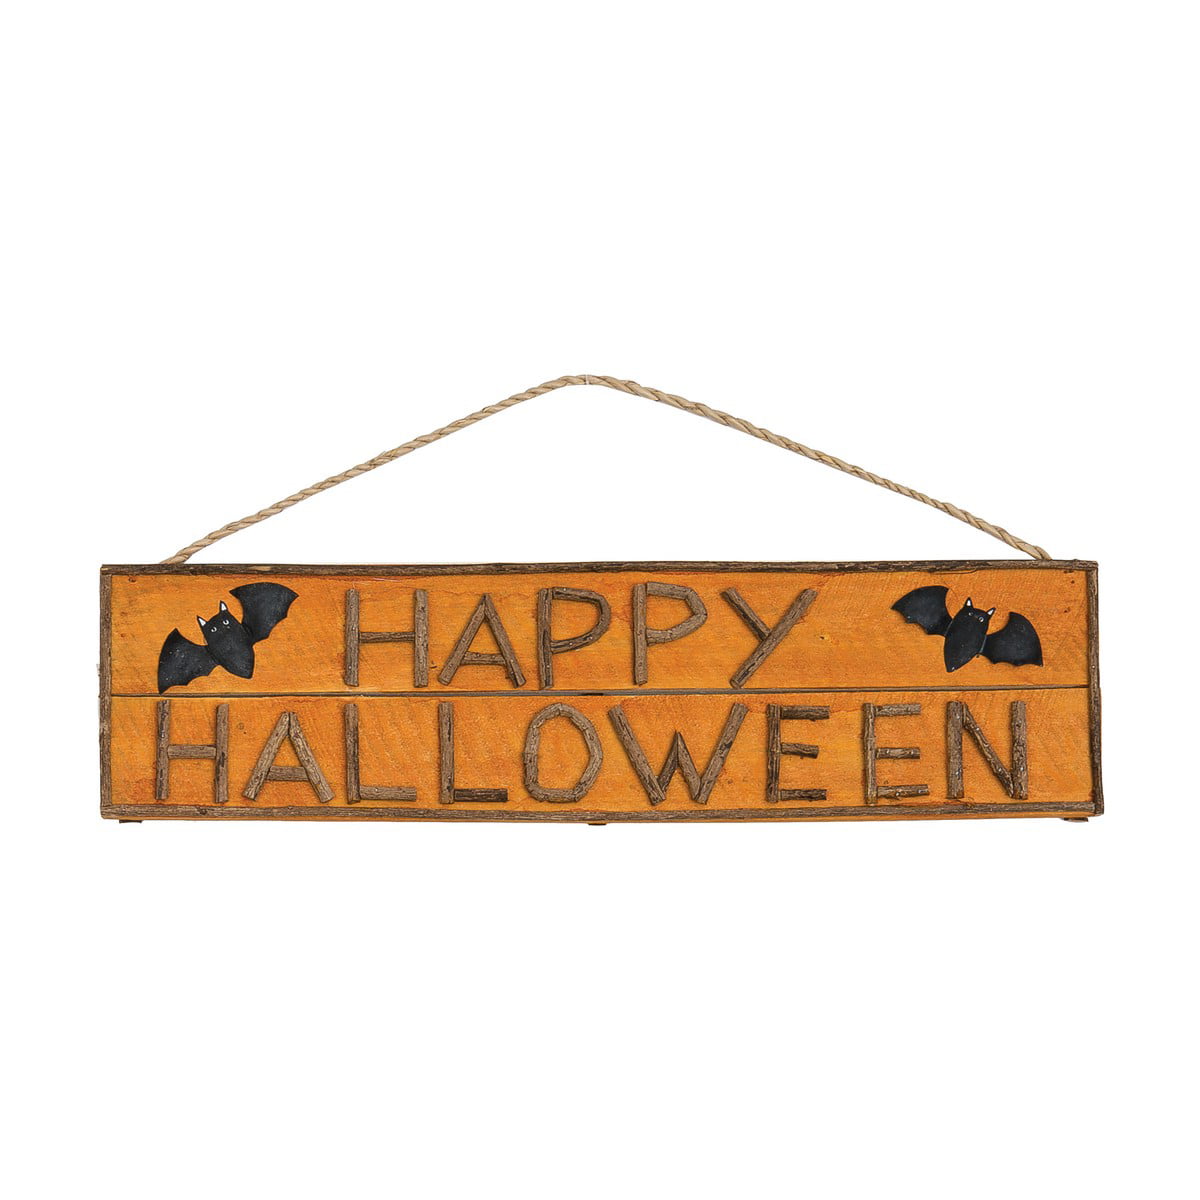 party decor hand painted wall decor Ready to ship door decor reclaimed wood sign Happy Halloween sign door hanger orange and black